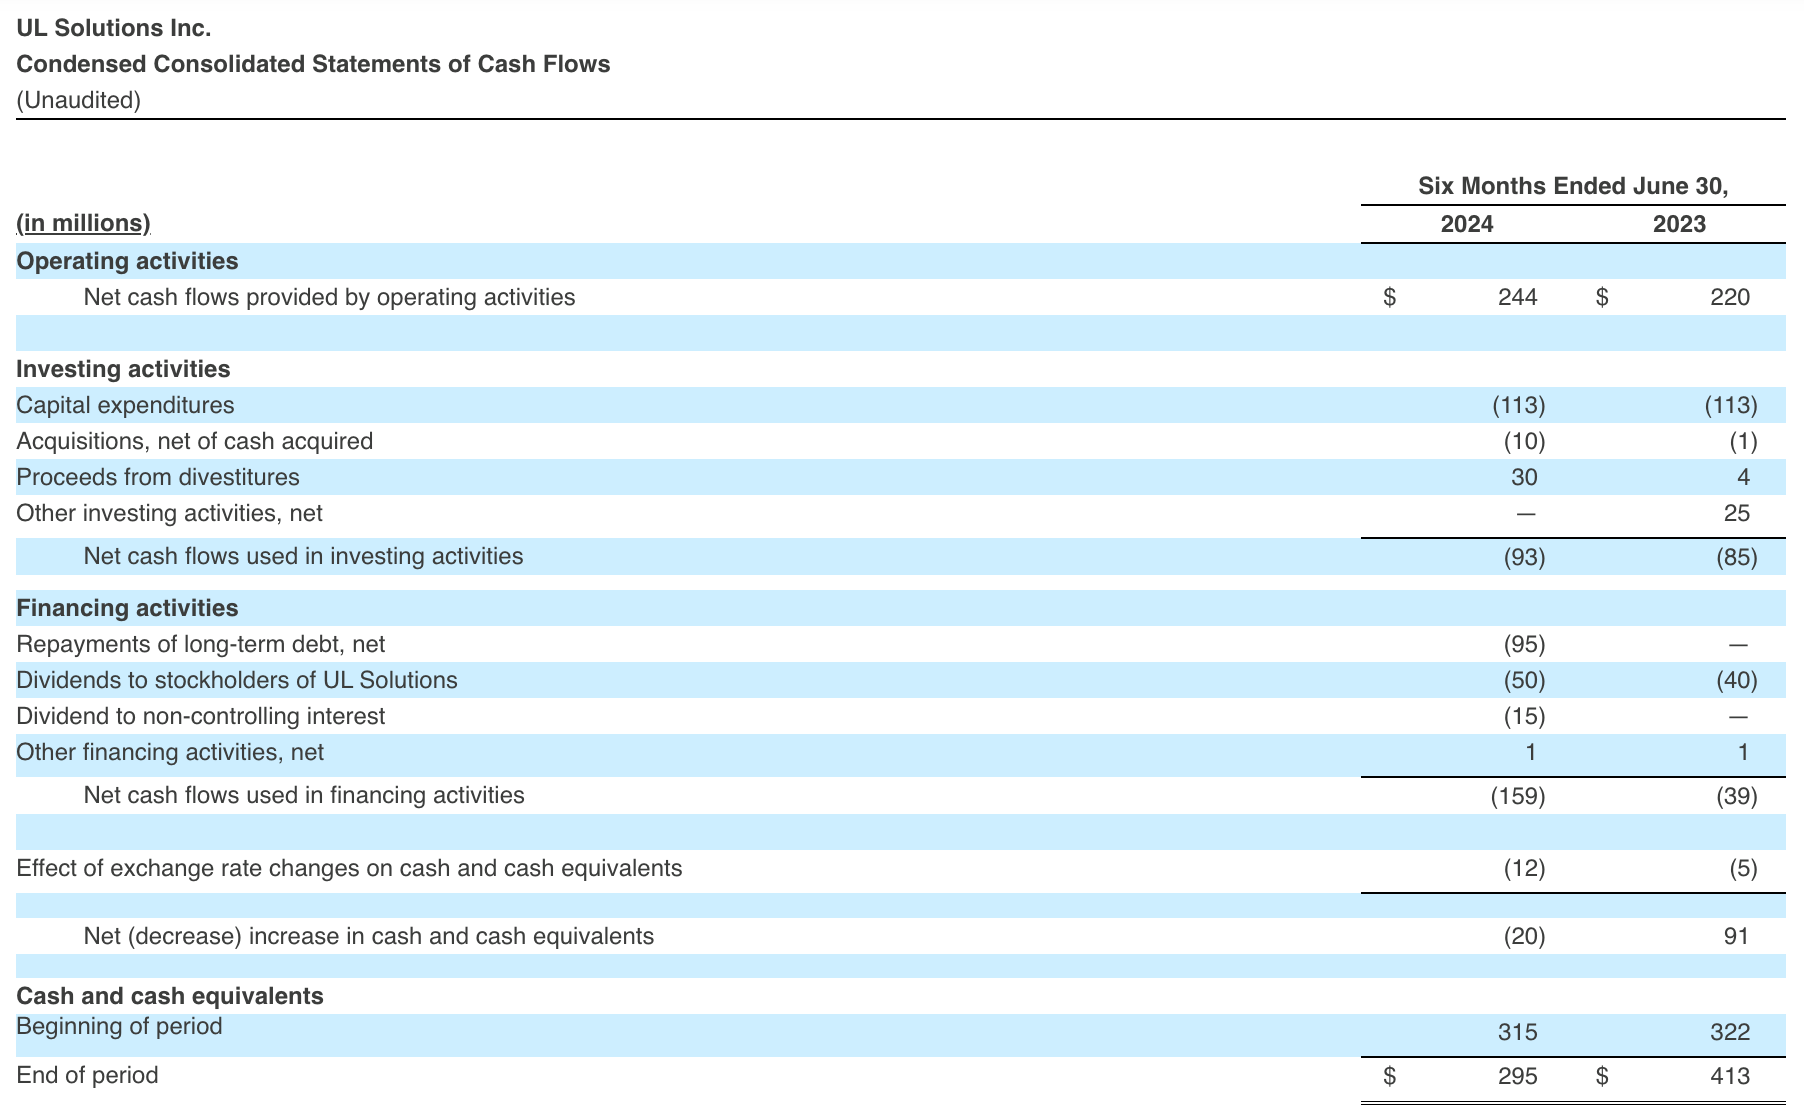 Condensed Consolidated Statements of Cash Flow Q2